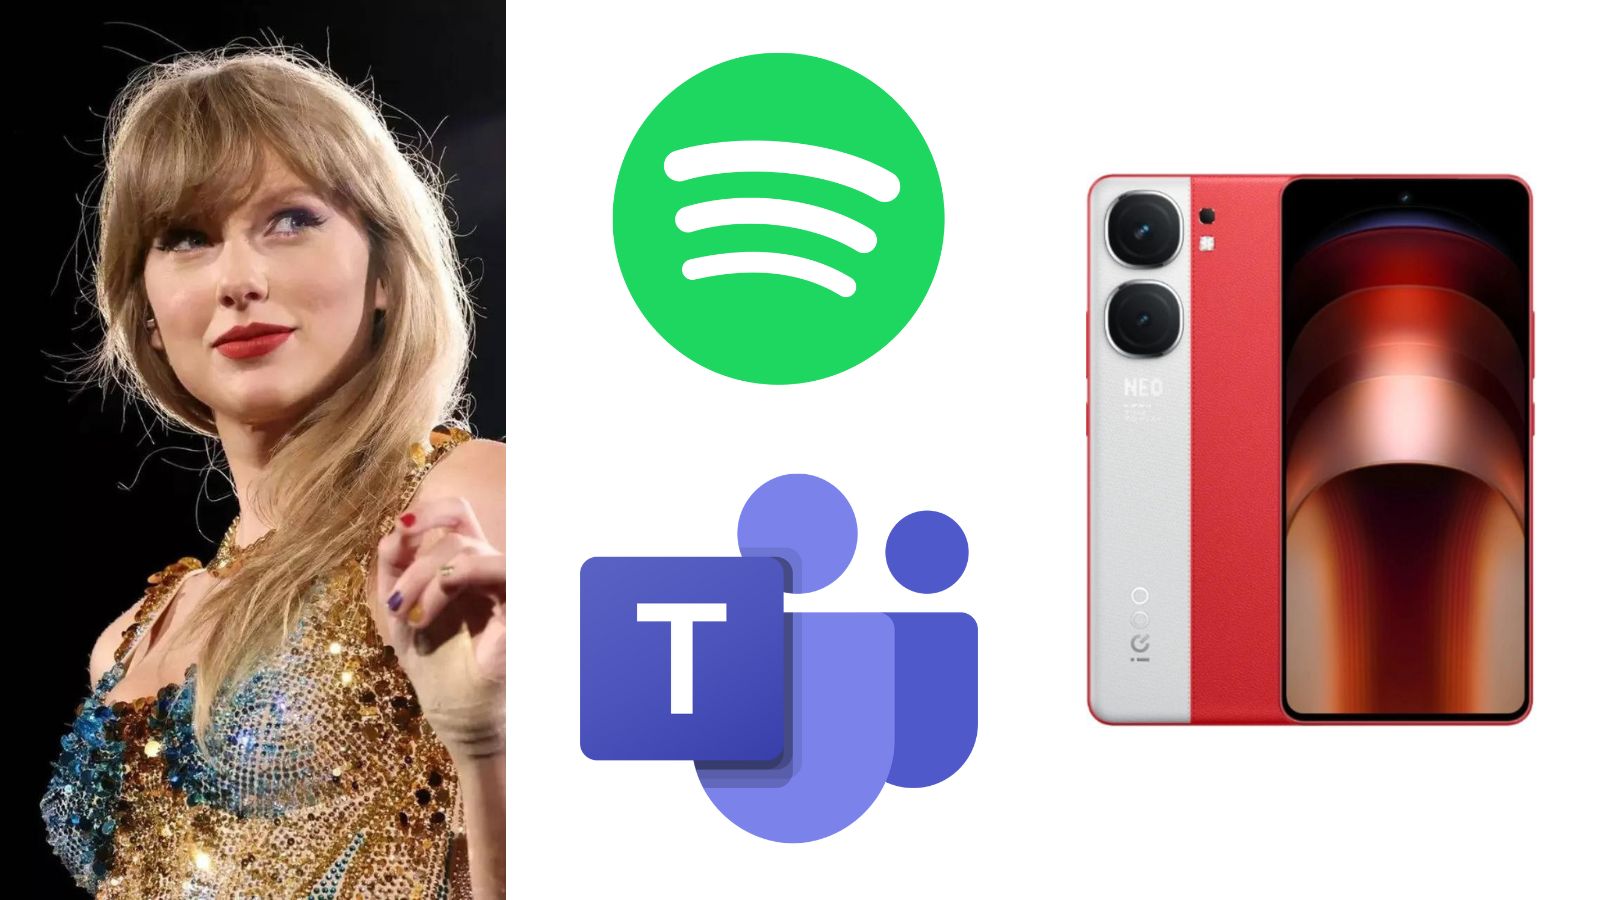 microsoft, android, tech news today: taylor swift ai images spark outrage, microsoft teams back up after outage, and more